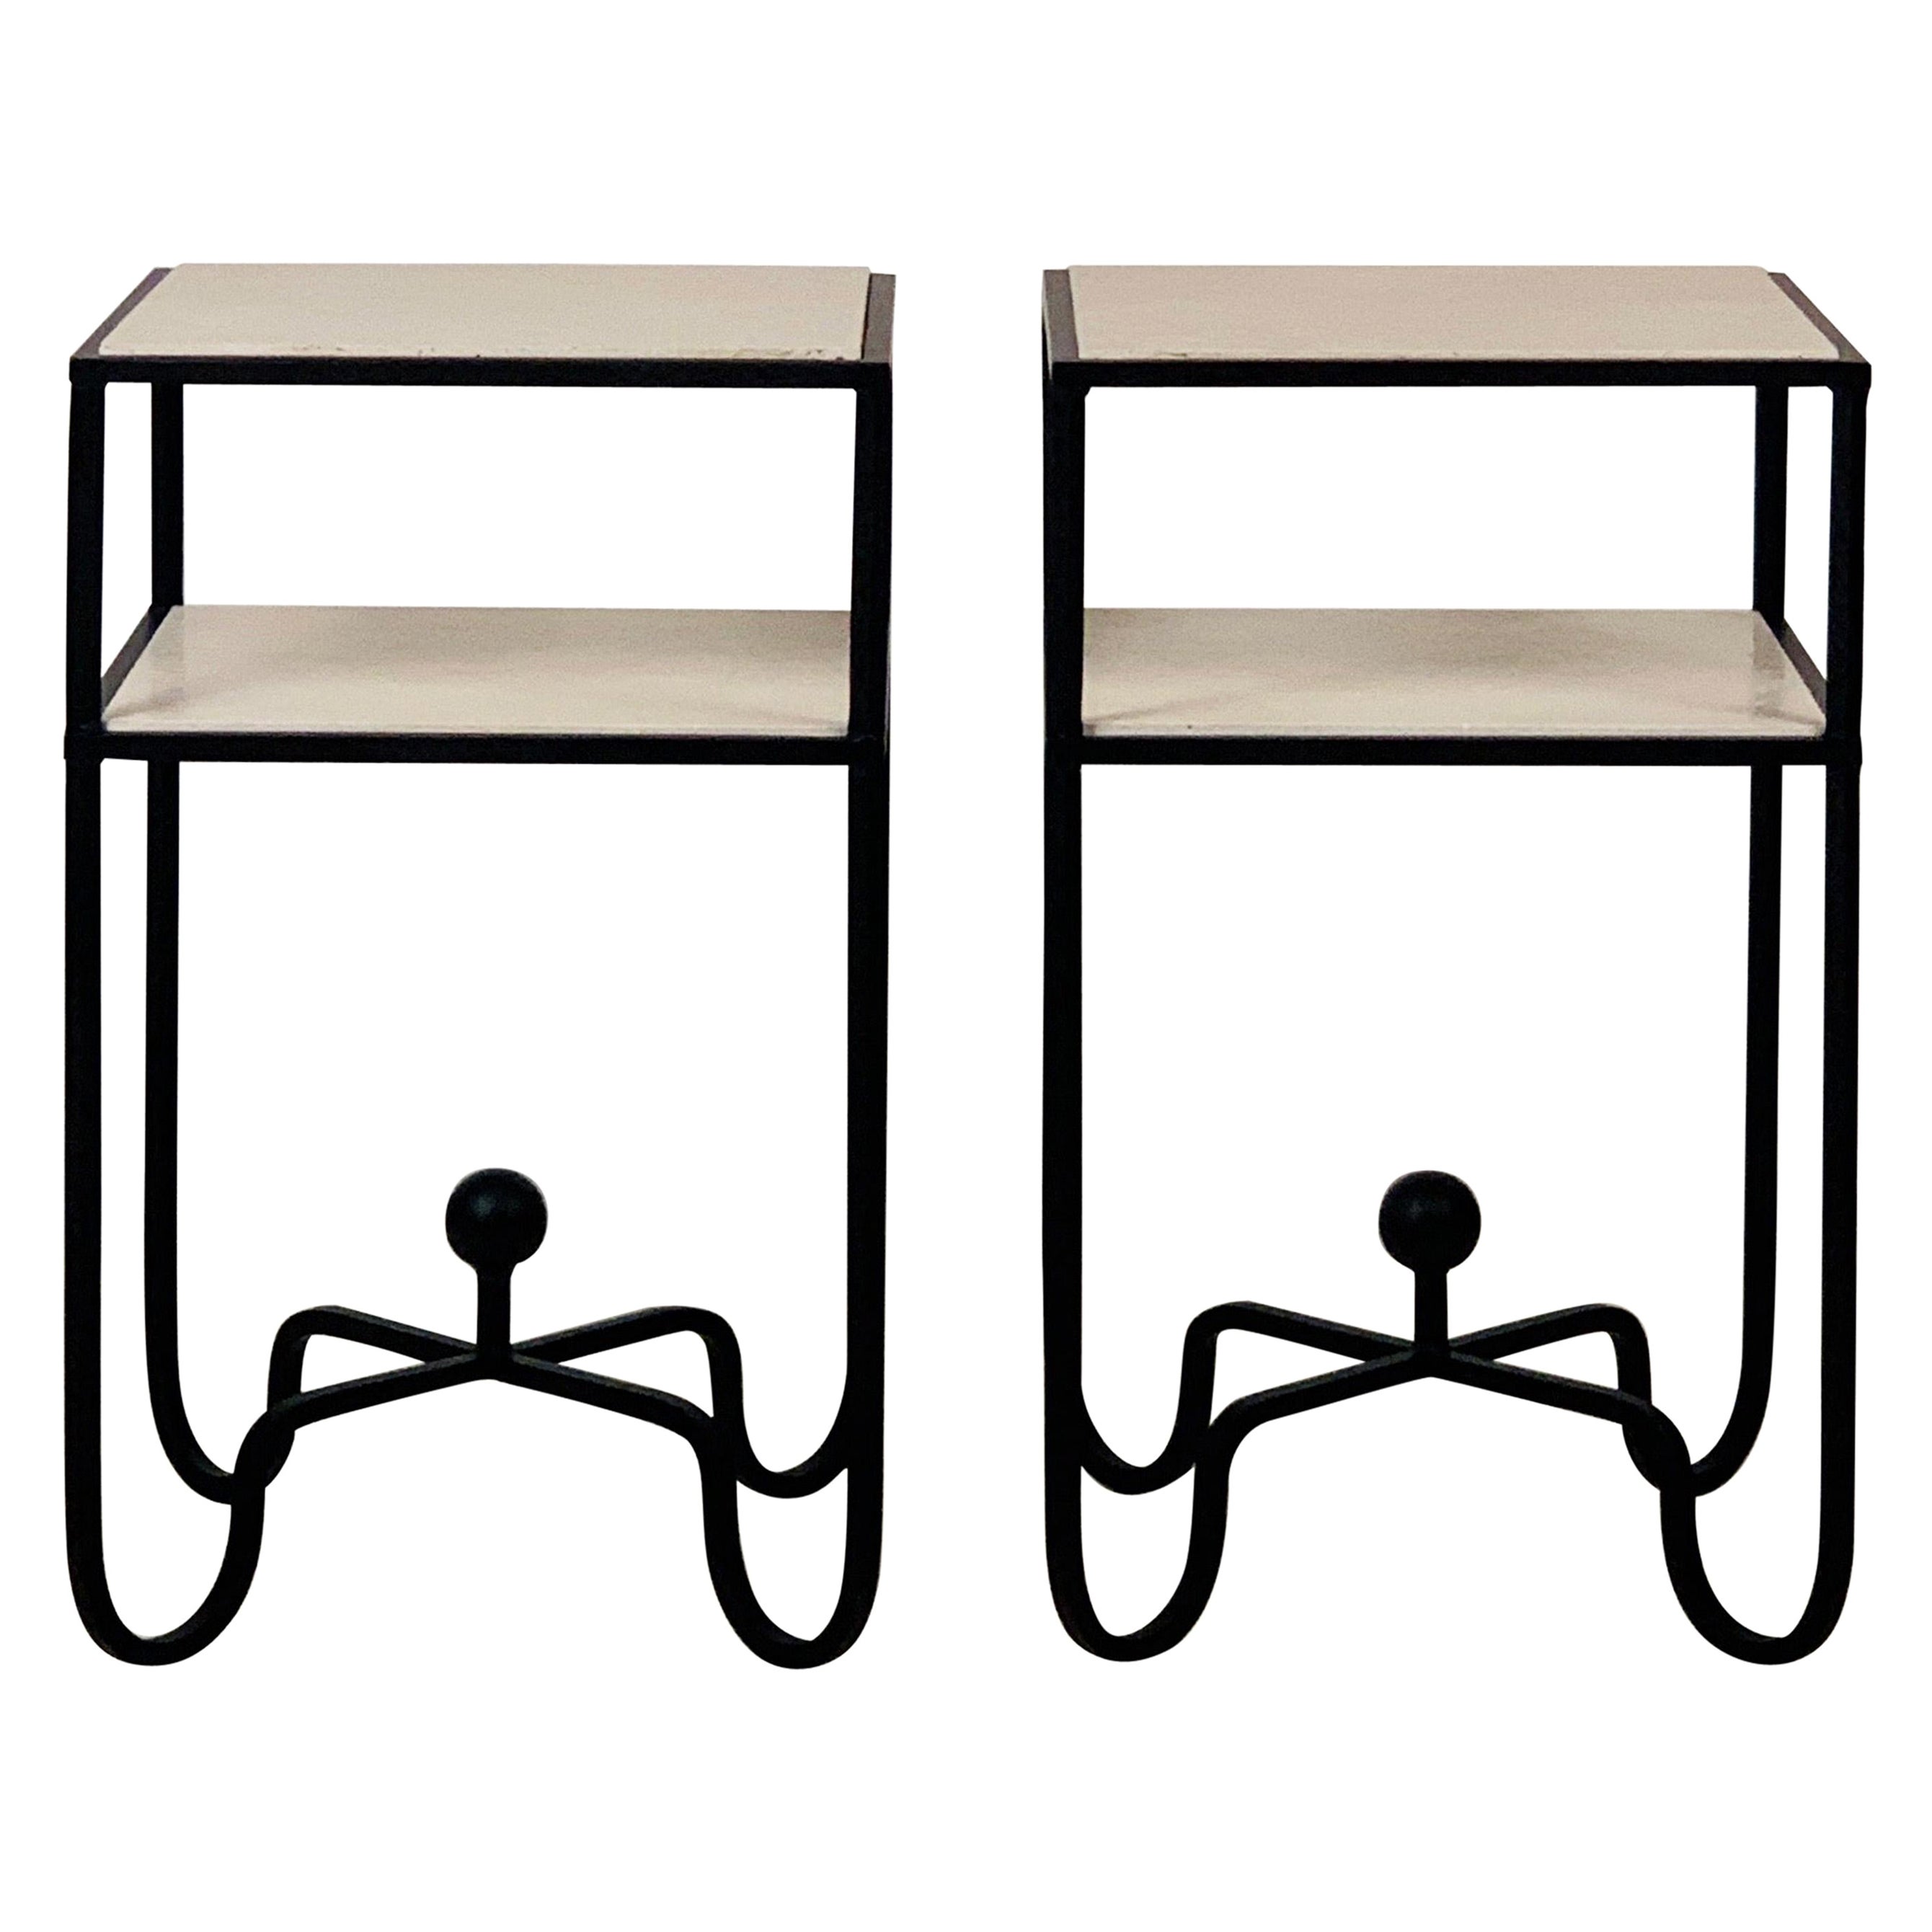 Pair of 2-Tier Entretoise Side Tables by Design Frères For Sale